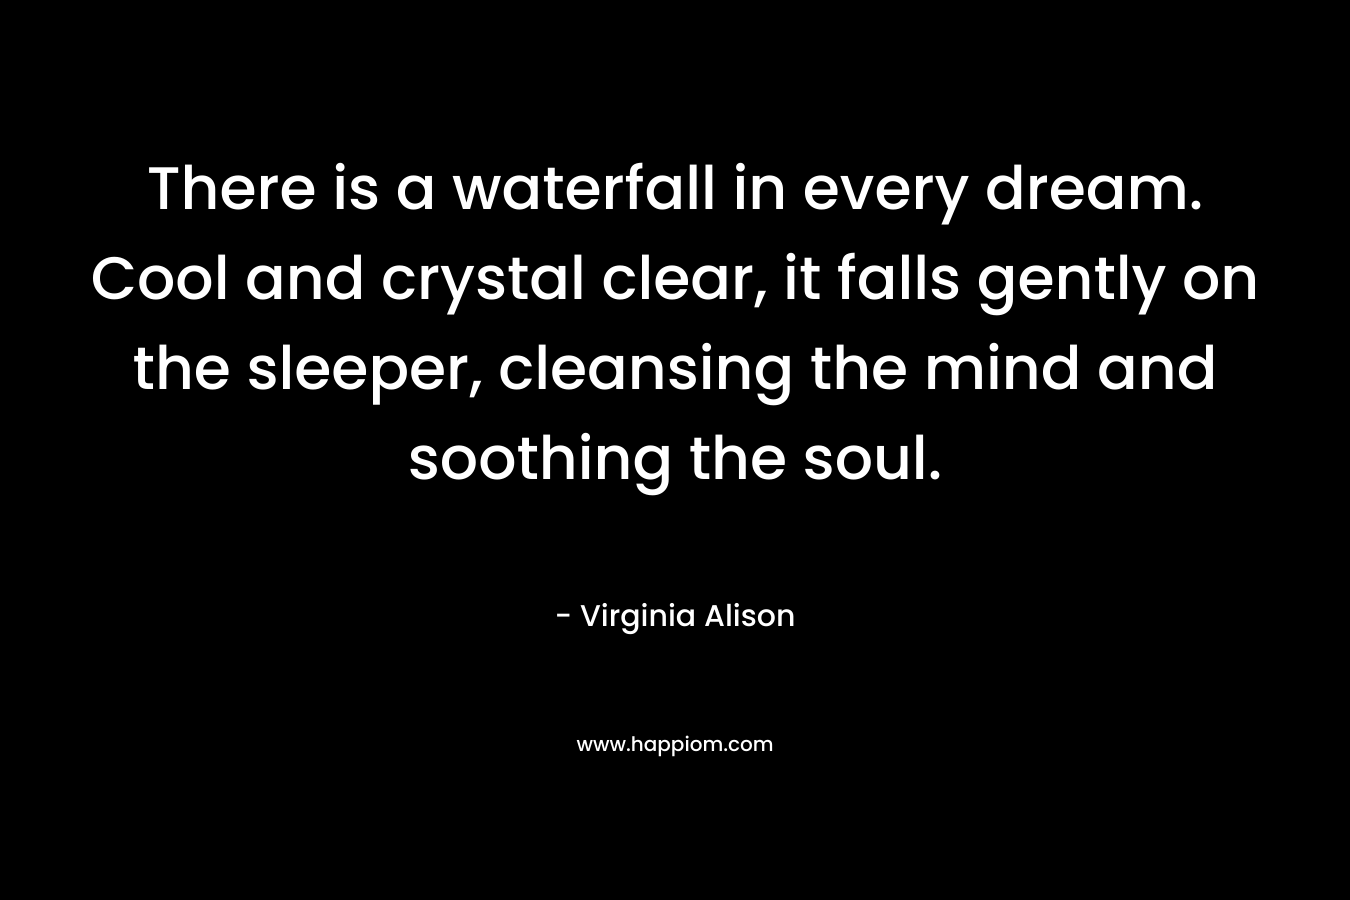 There is a waterfall in every dream. Cool and crystal clear, it falls gently on the sleeper, cleansing the mind and soothing the soul. – Virginia Alison